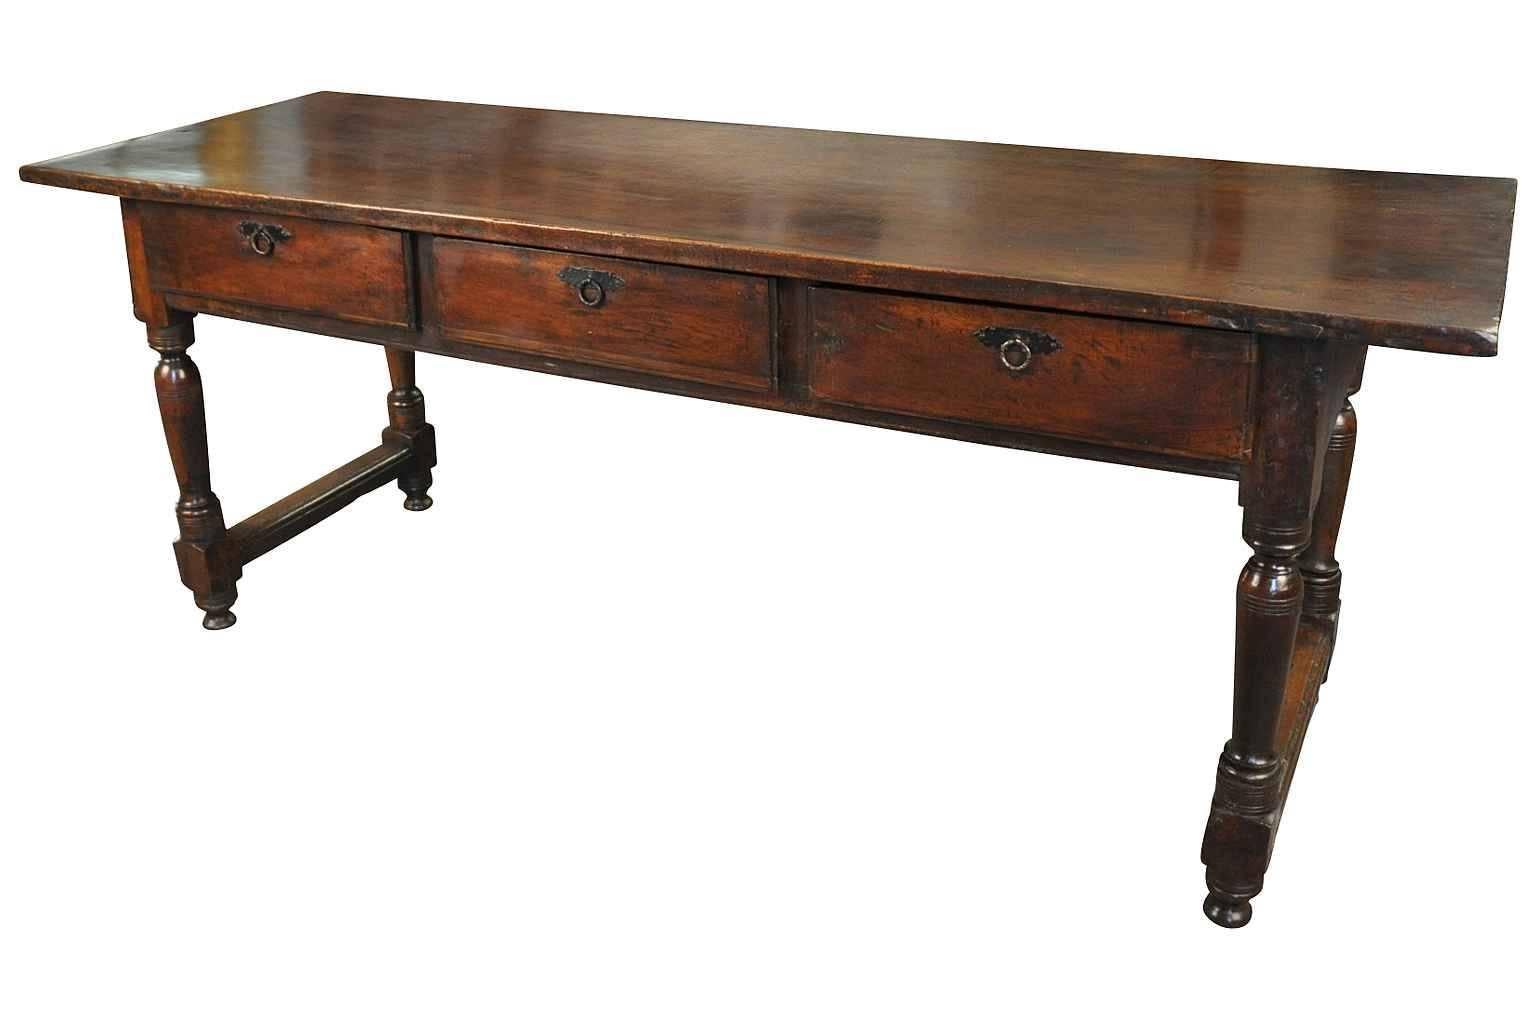 A very stunning 18th century three-drawer console from the Catalan region of Spain. Wonderfully constructed from walnut with an impressive solid board top. Fabulous patina and graining. Not only terrific as a console, but serves wonderfully as a